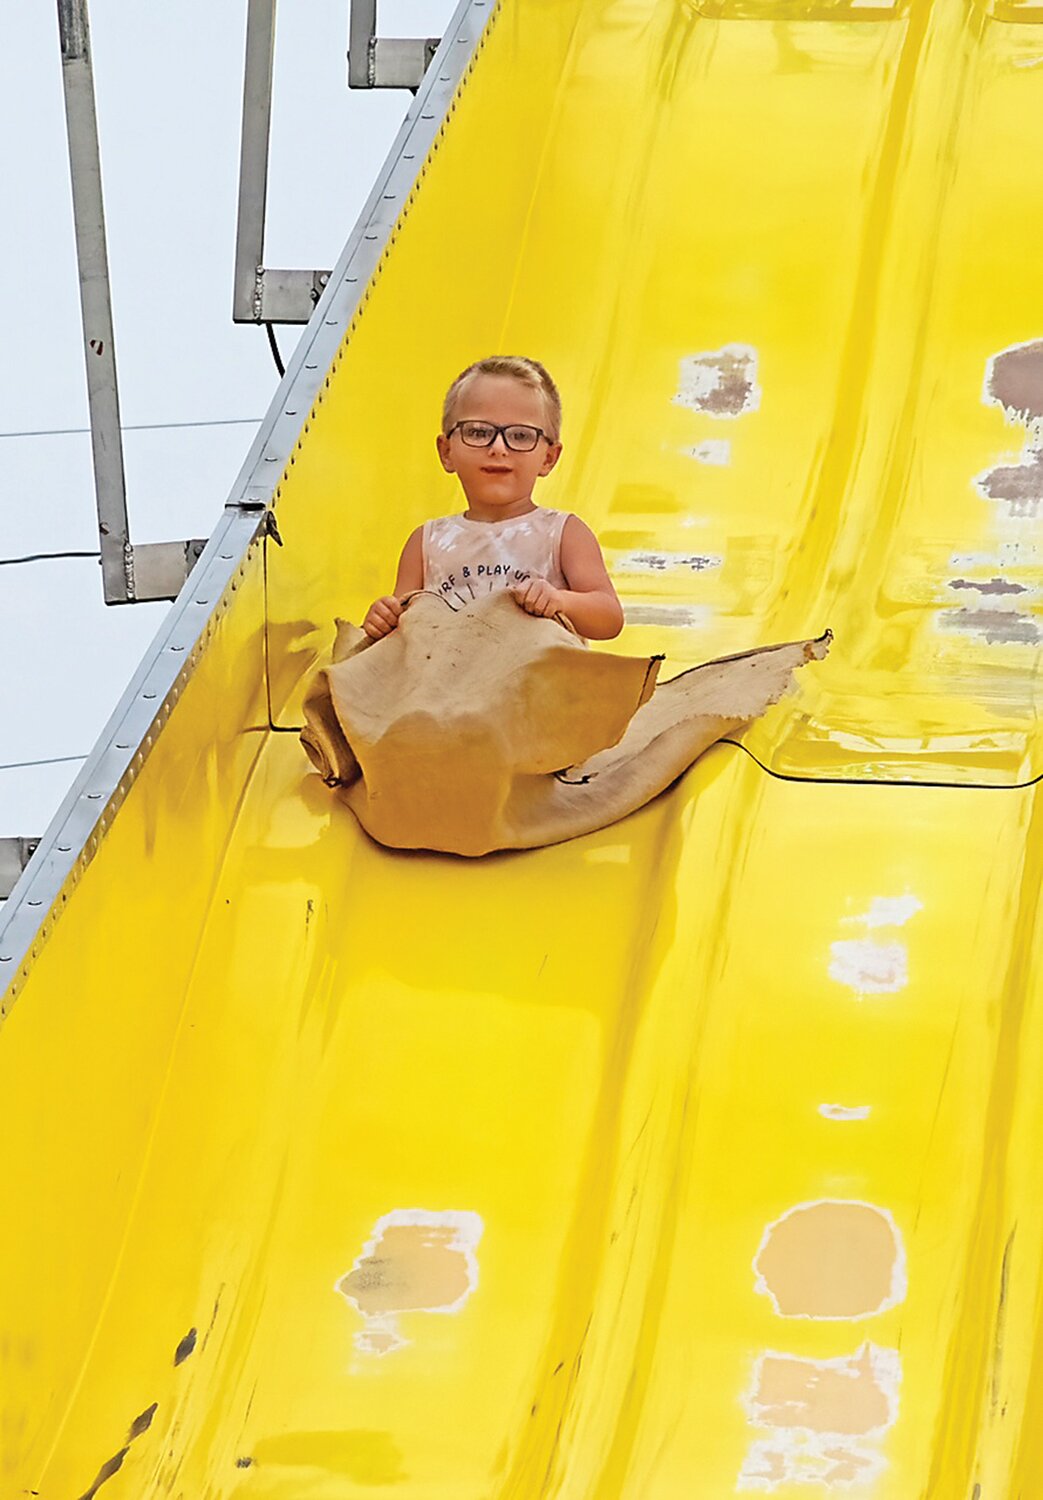 Christian Malseed of Lansdale rides down the slide.